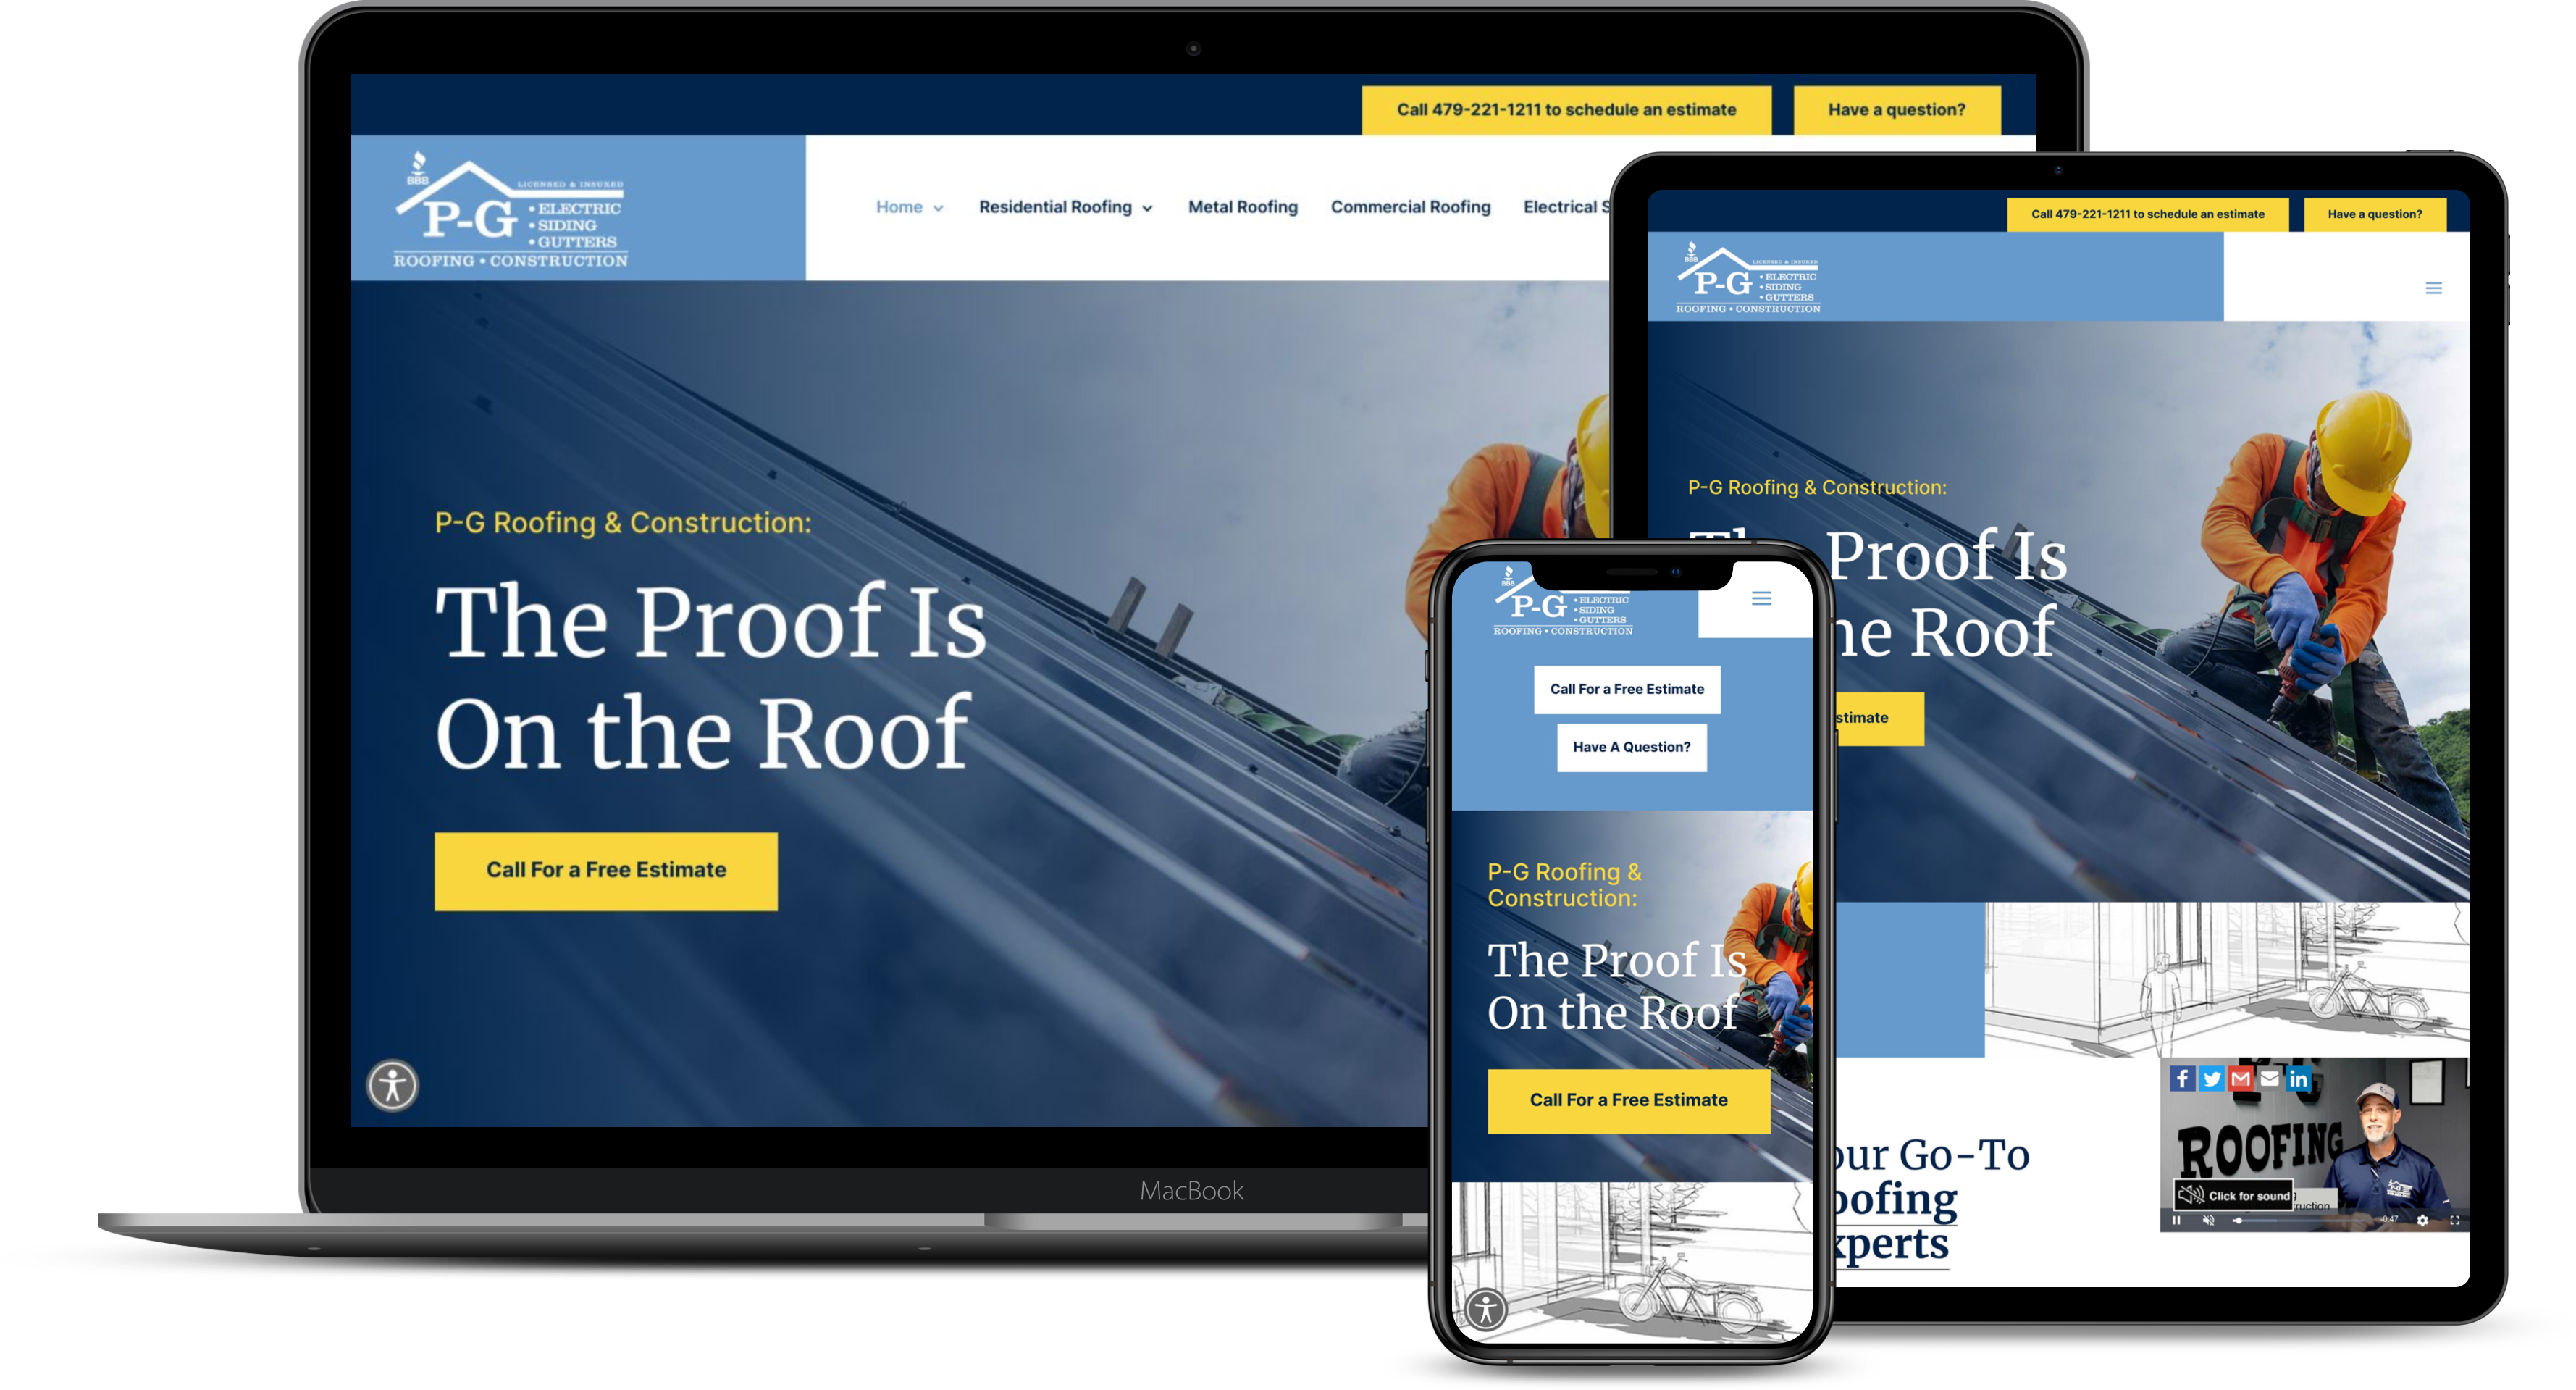 P-G Roofing & Construction